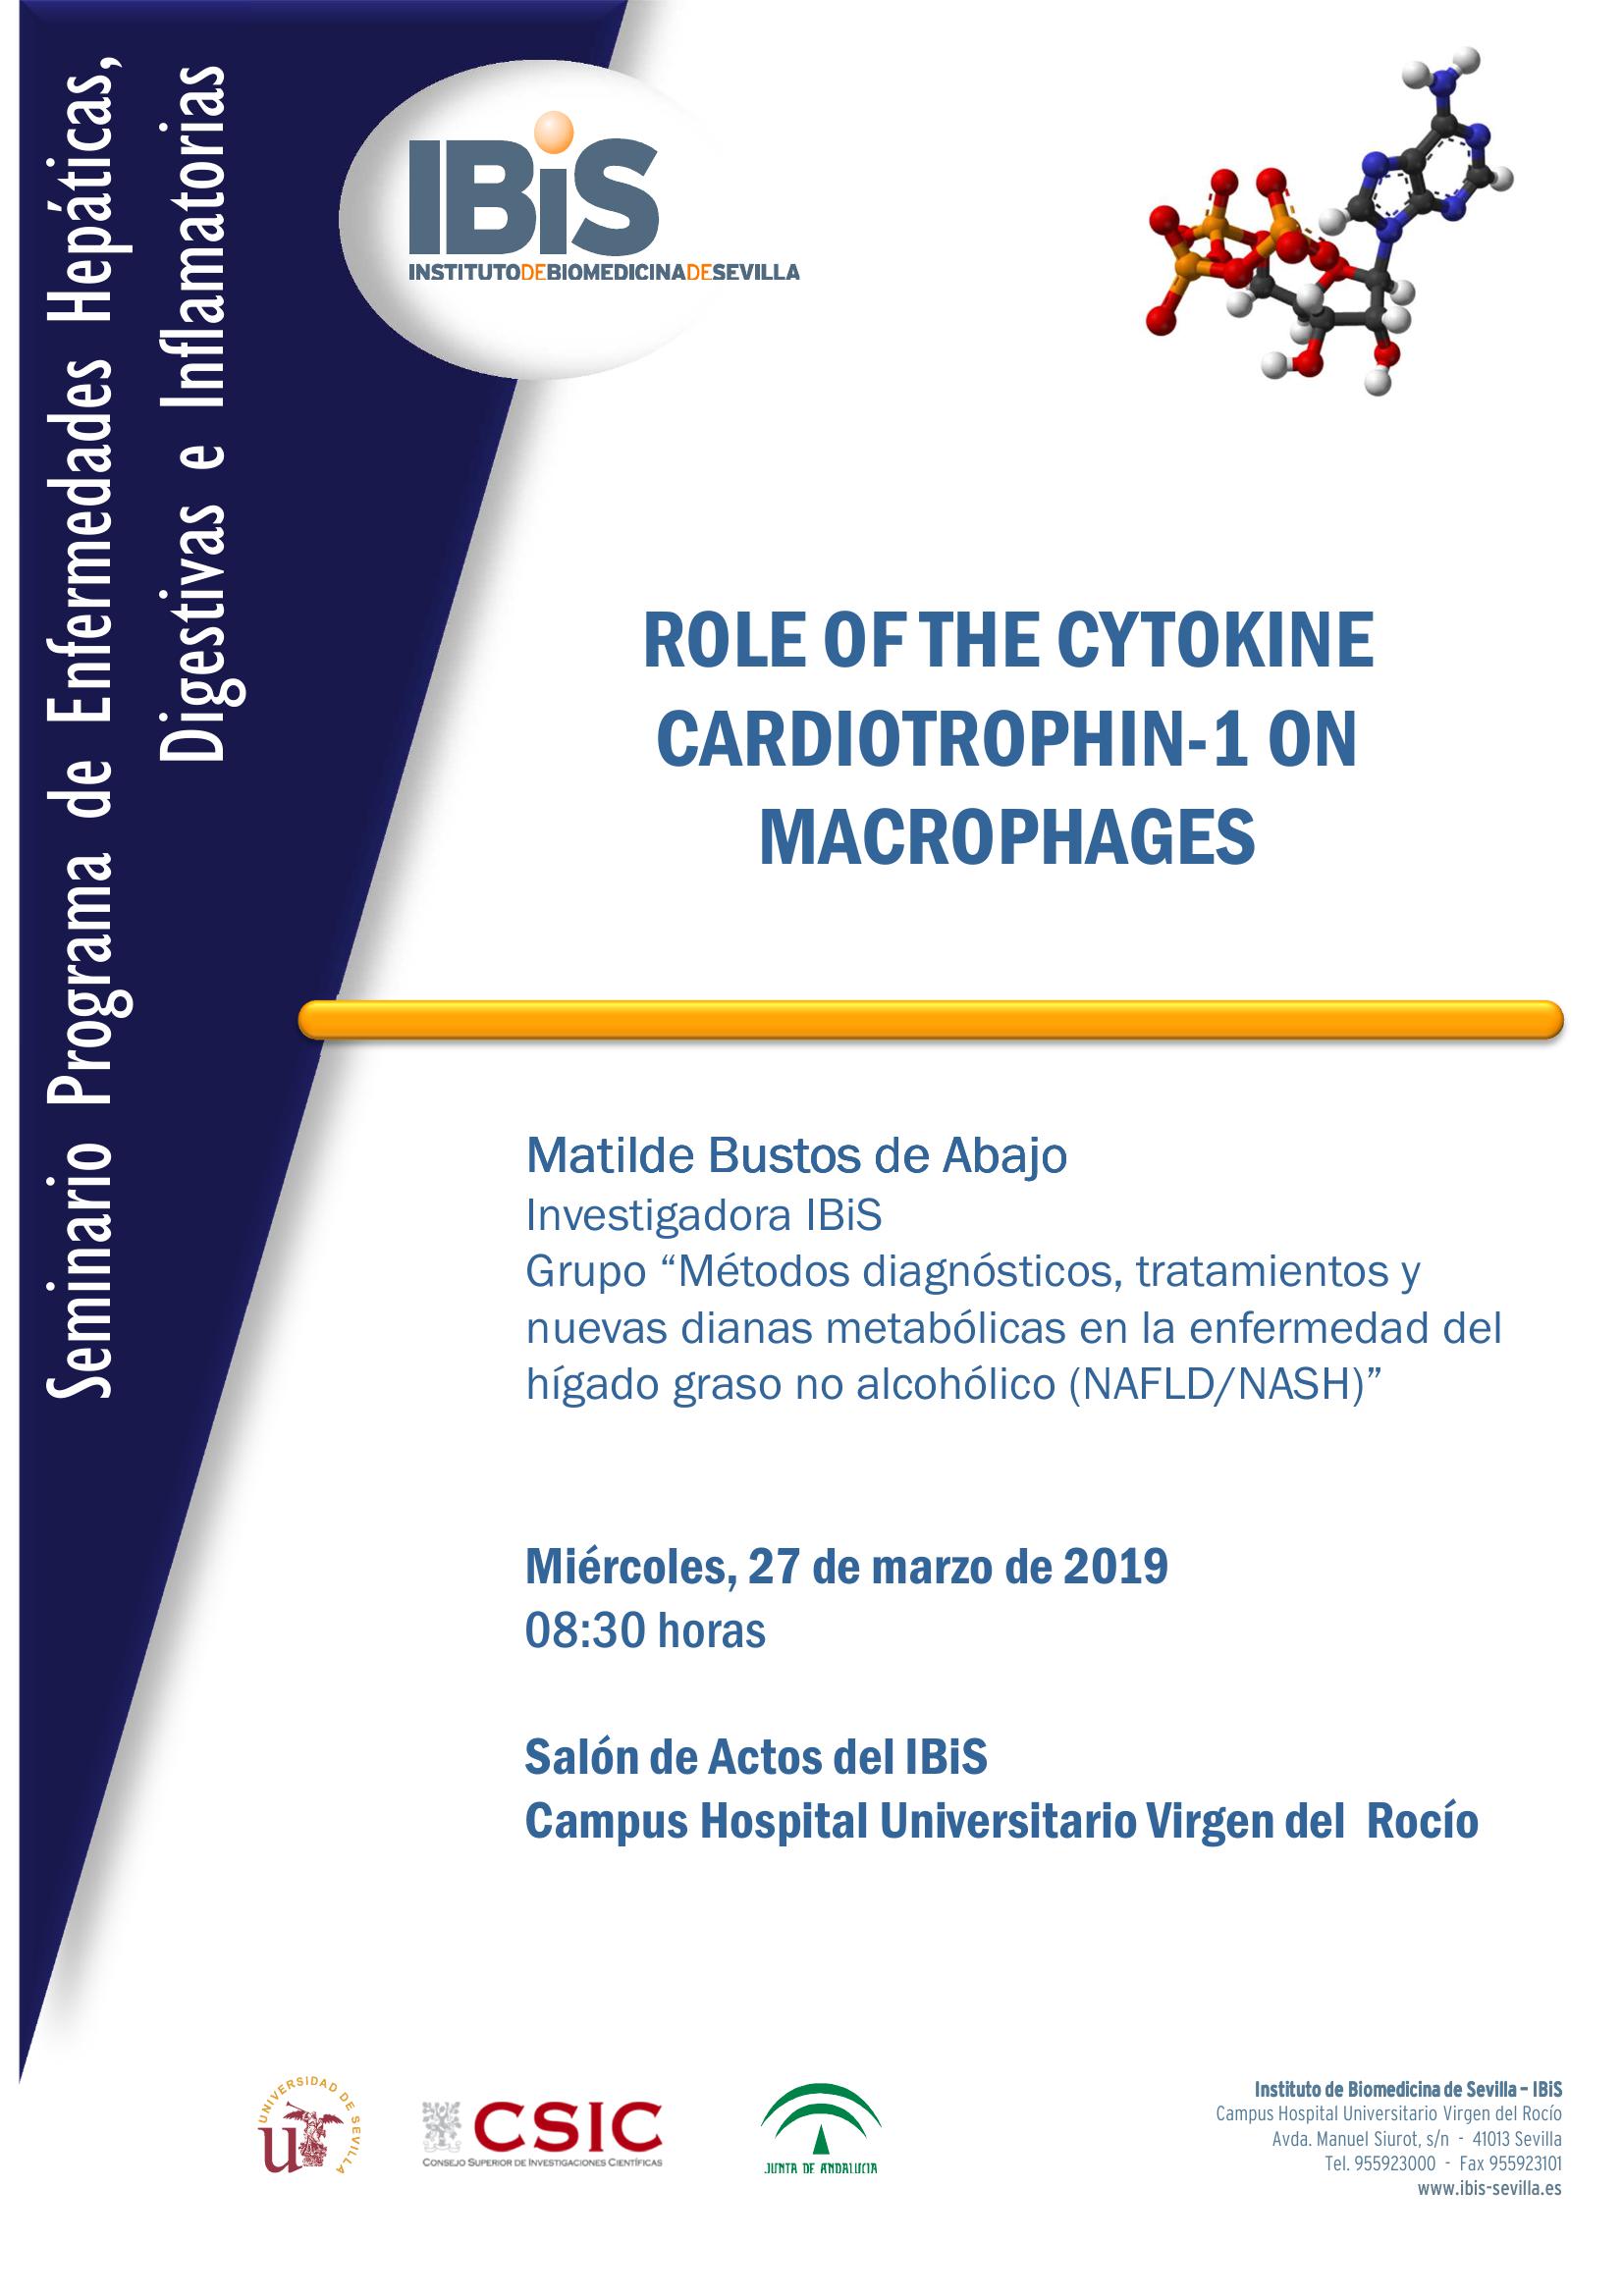 Poster: ROLE OF THE CYTOKINE CARDIOTROPHIN-1 ON MACROPHAGES